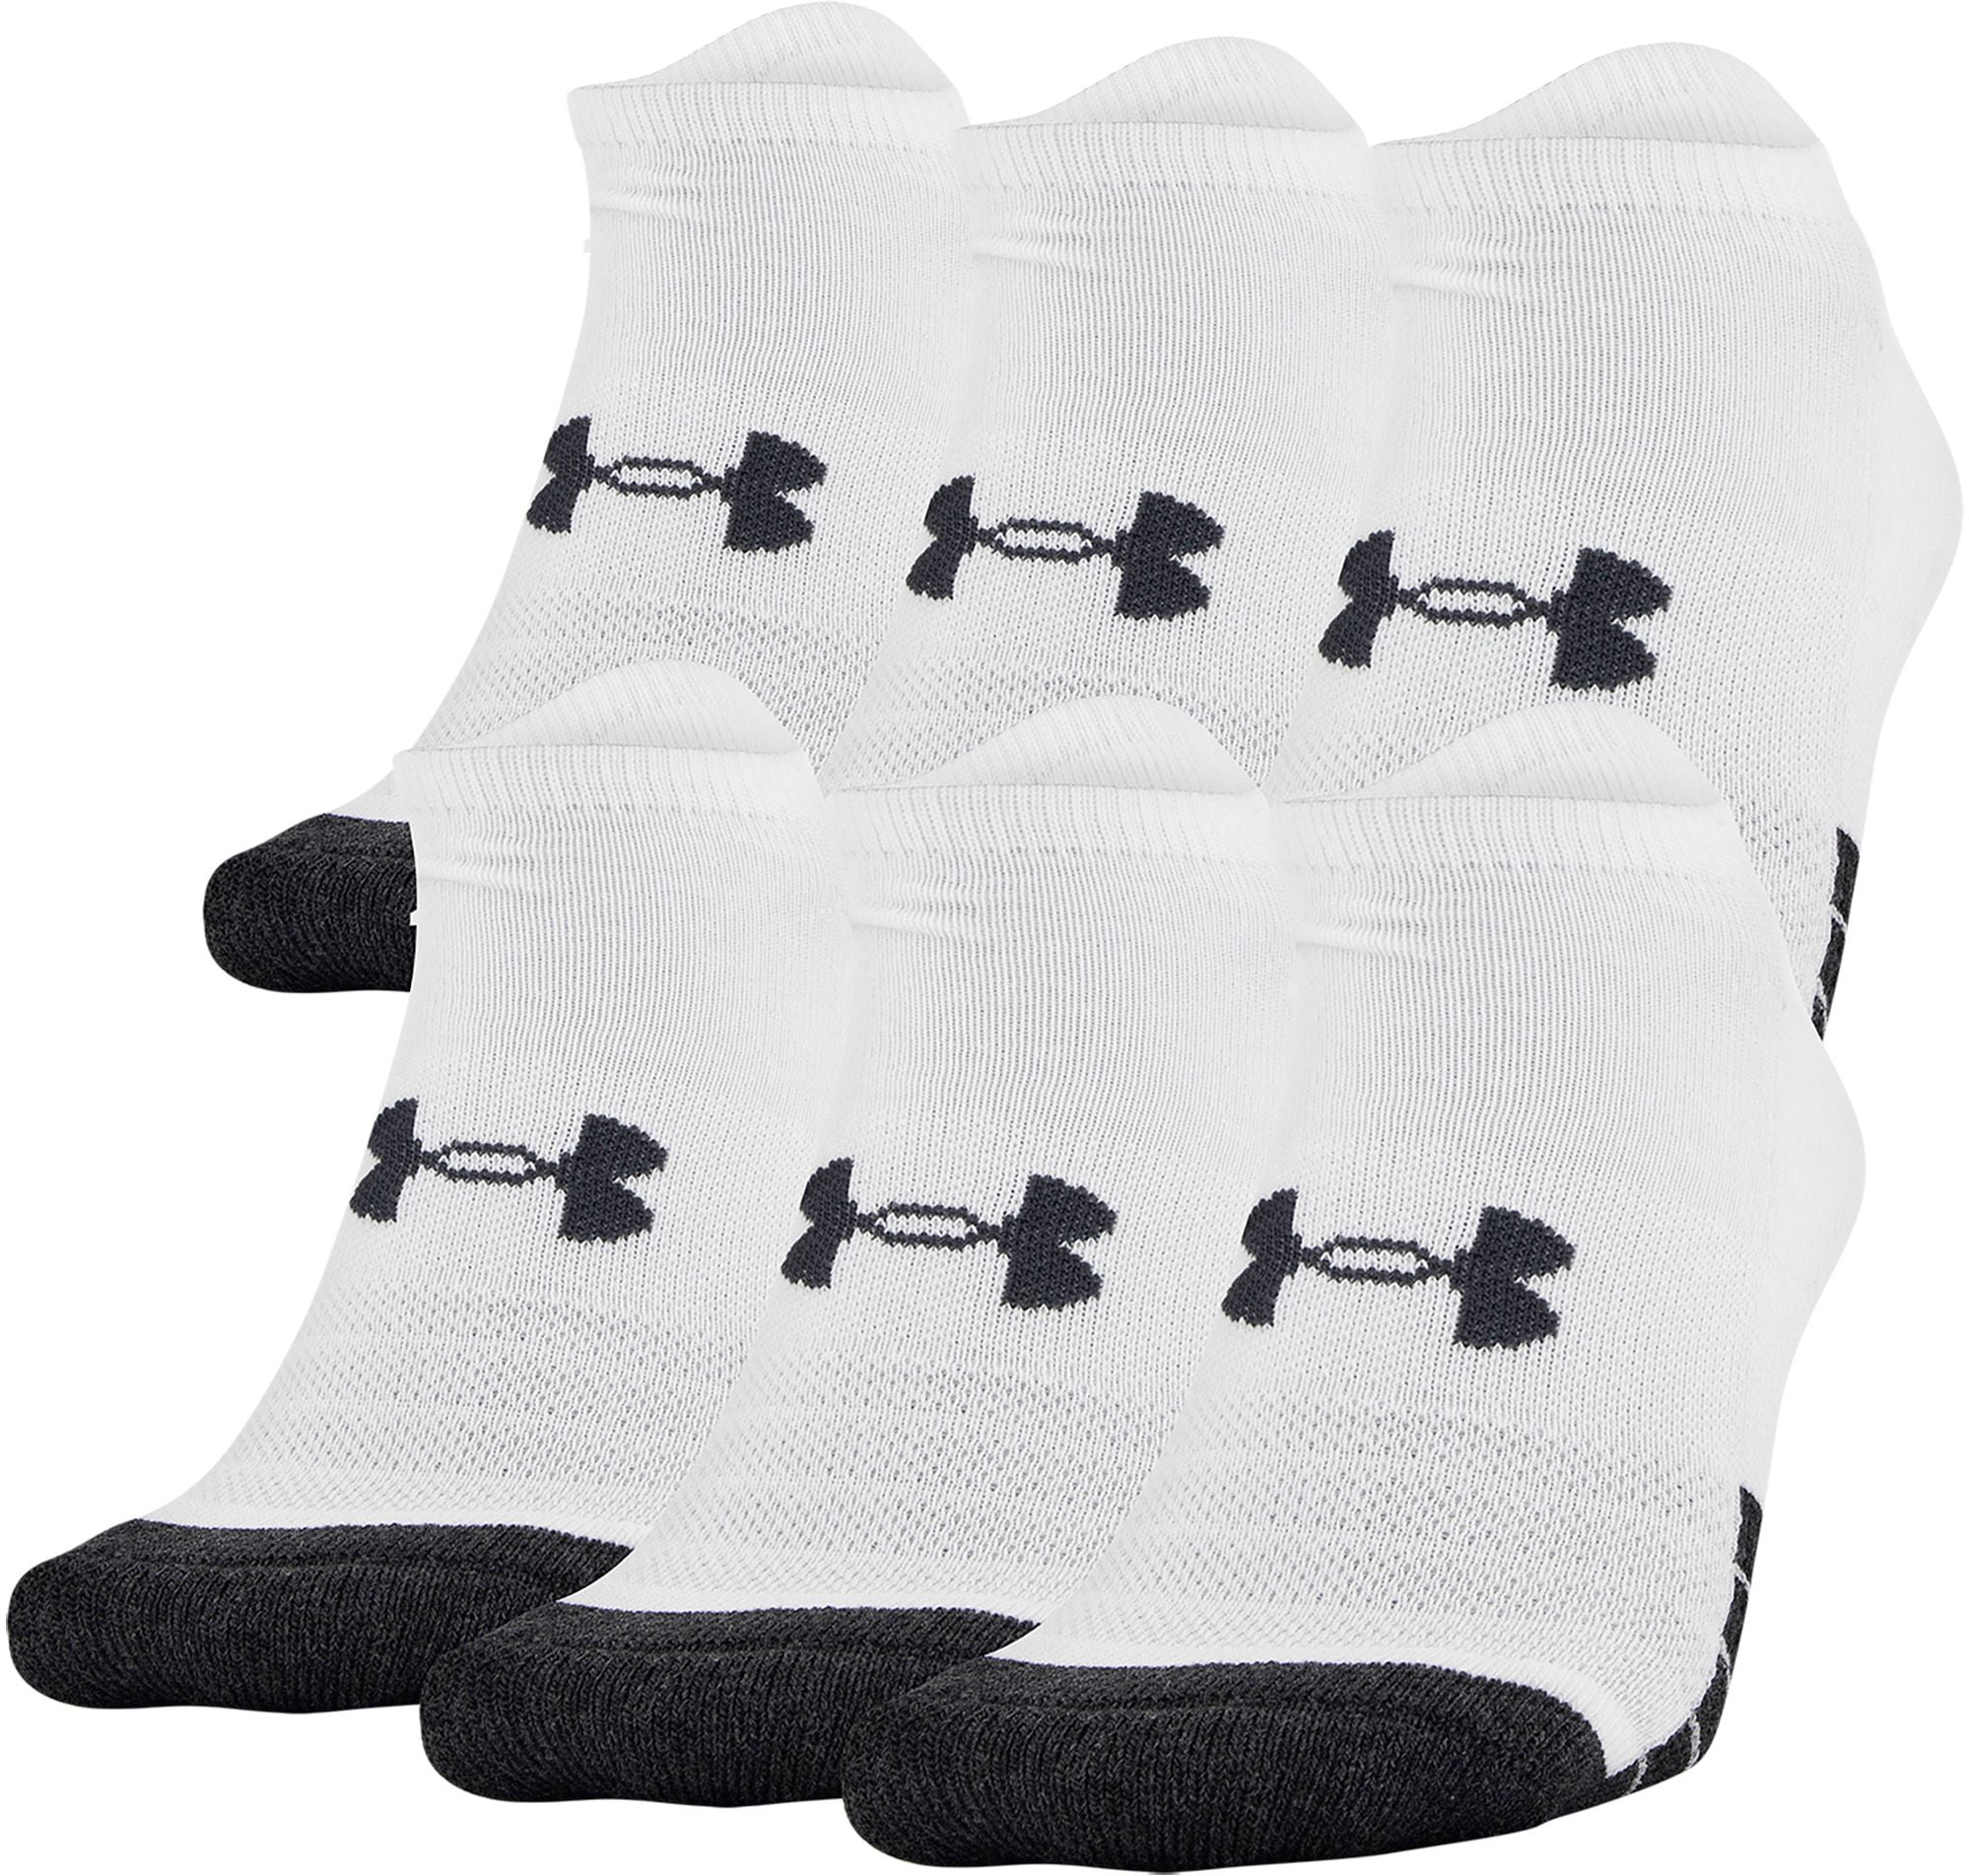  Under Armour Adult Performance Tech No Show Socks